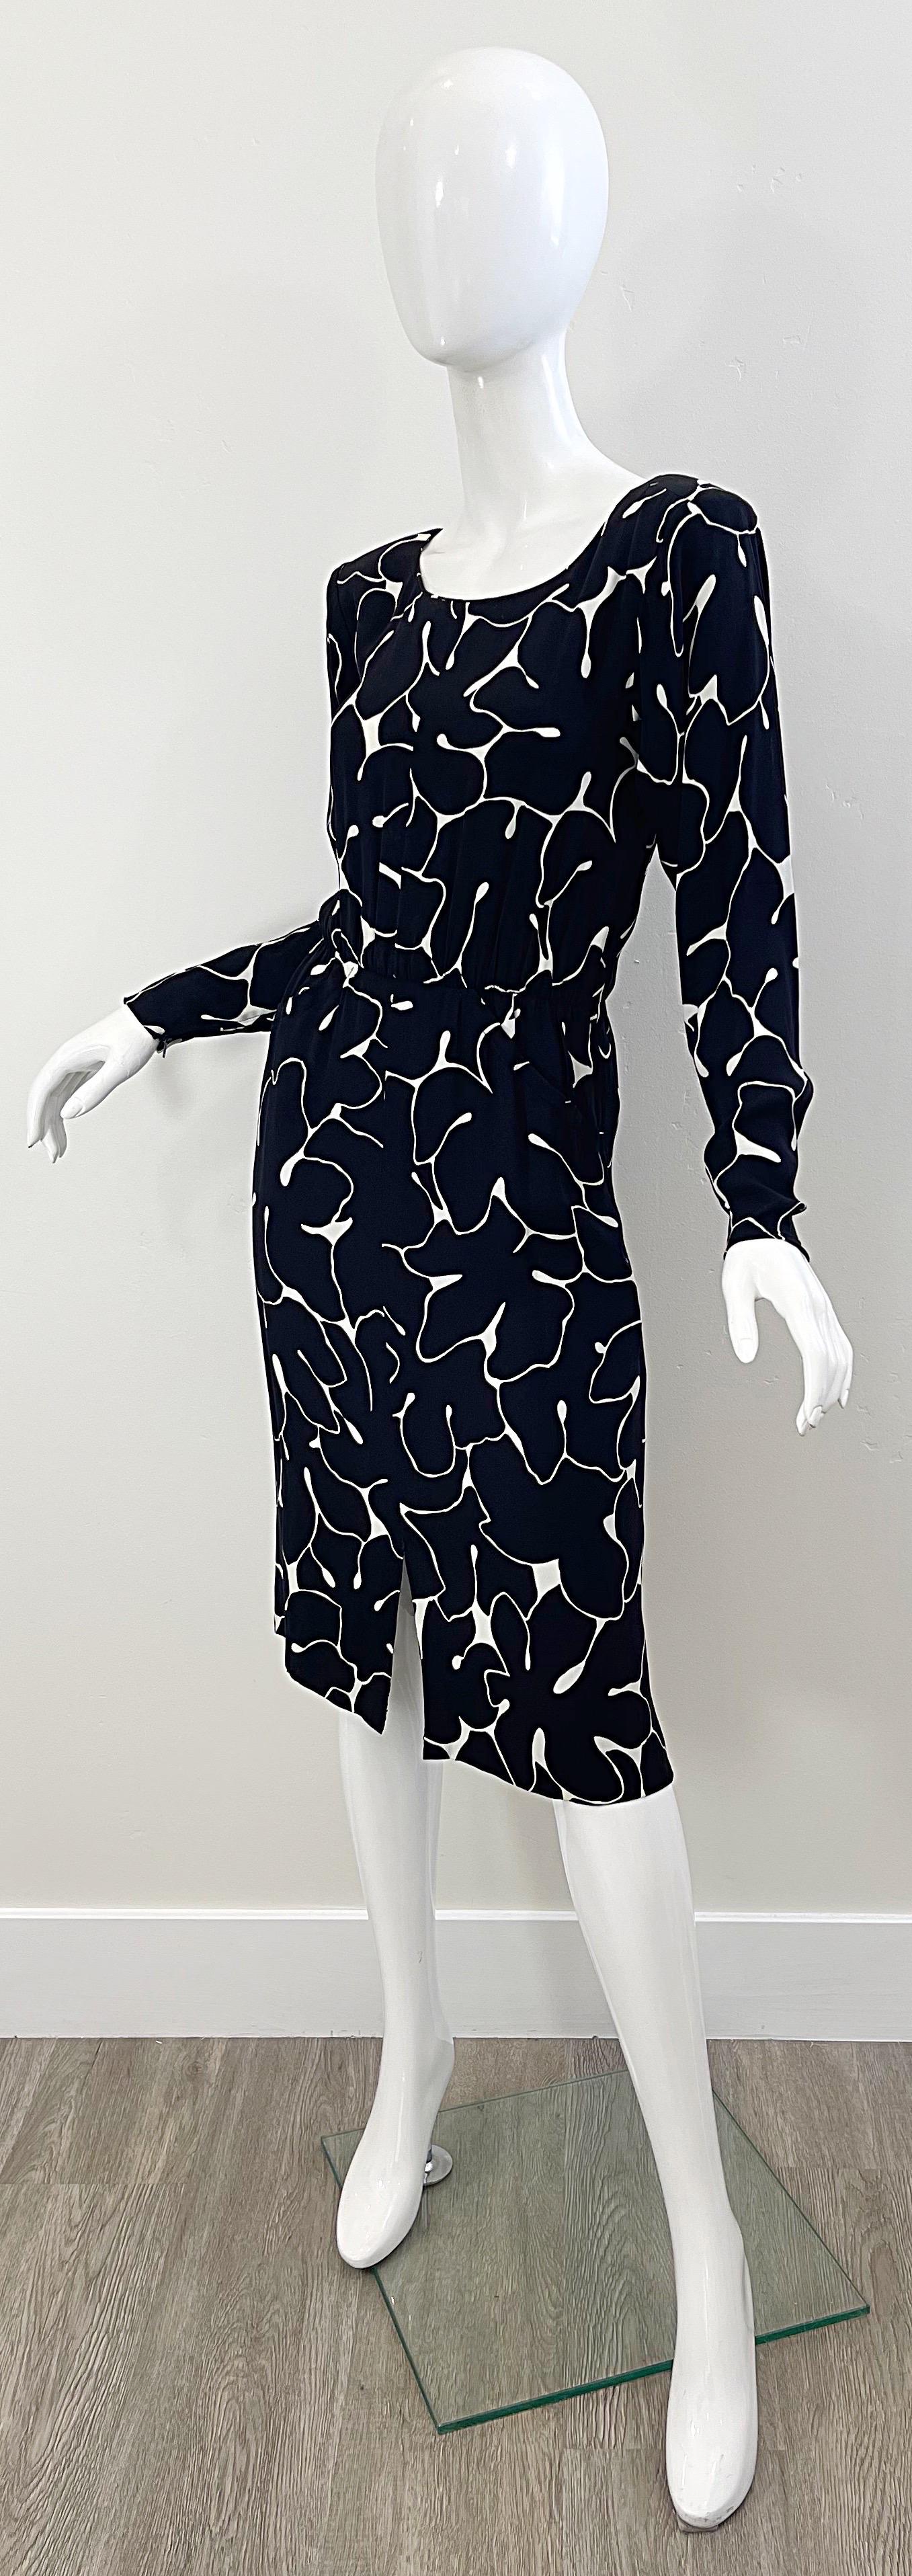 Yves Saint Laurent 1980s Black and White Abstract Flower Print Silk Crepe Dress For Sale 4